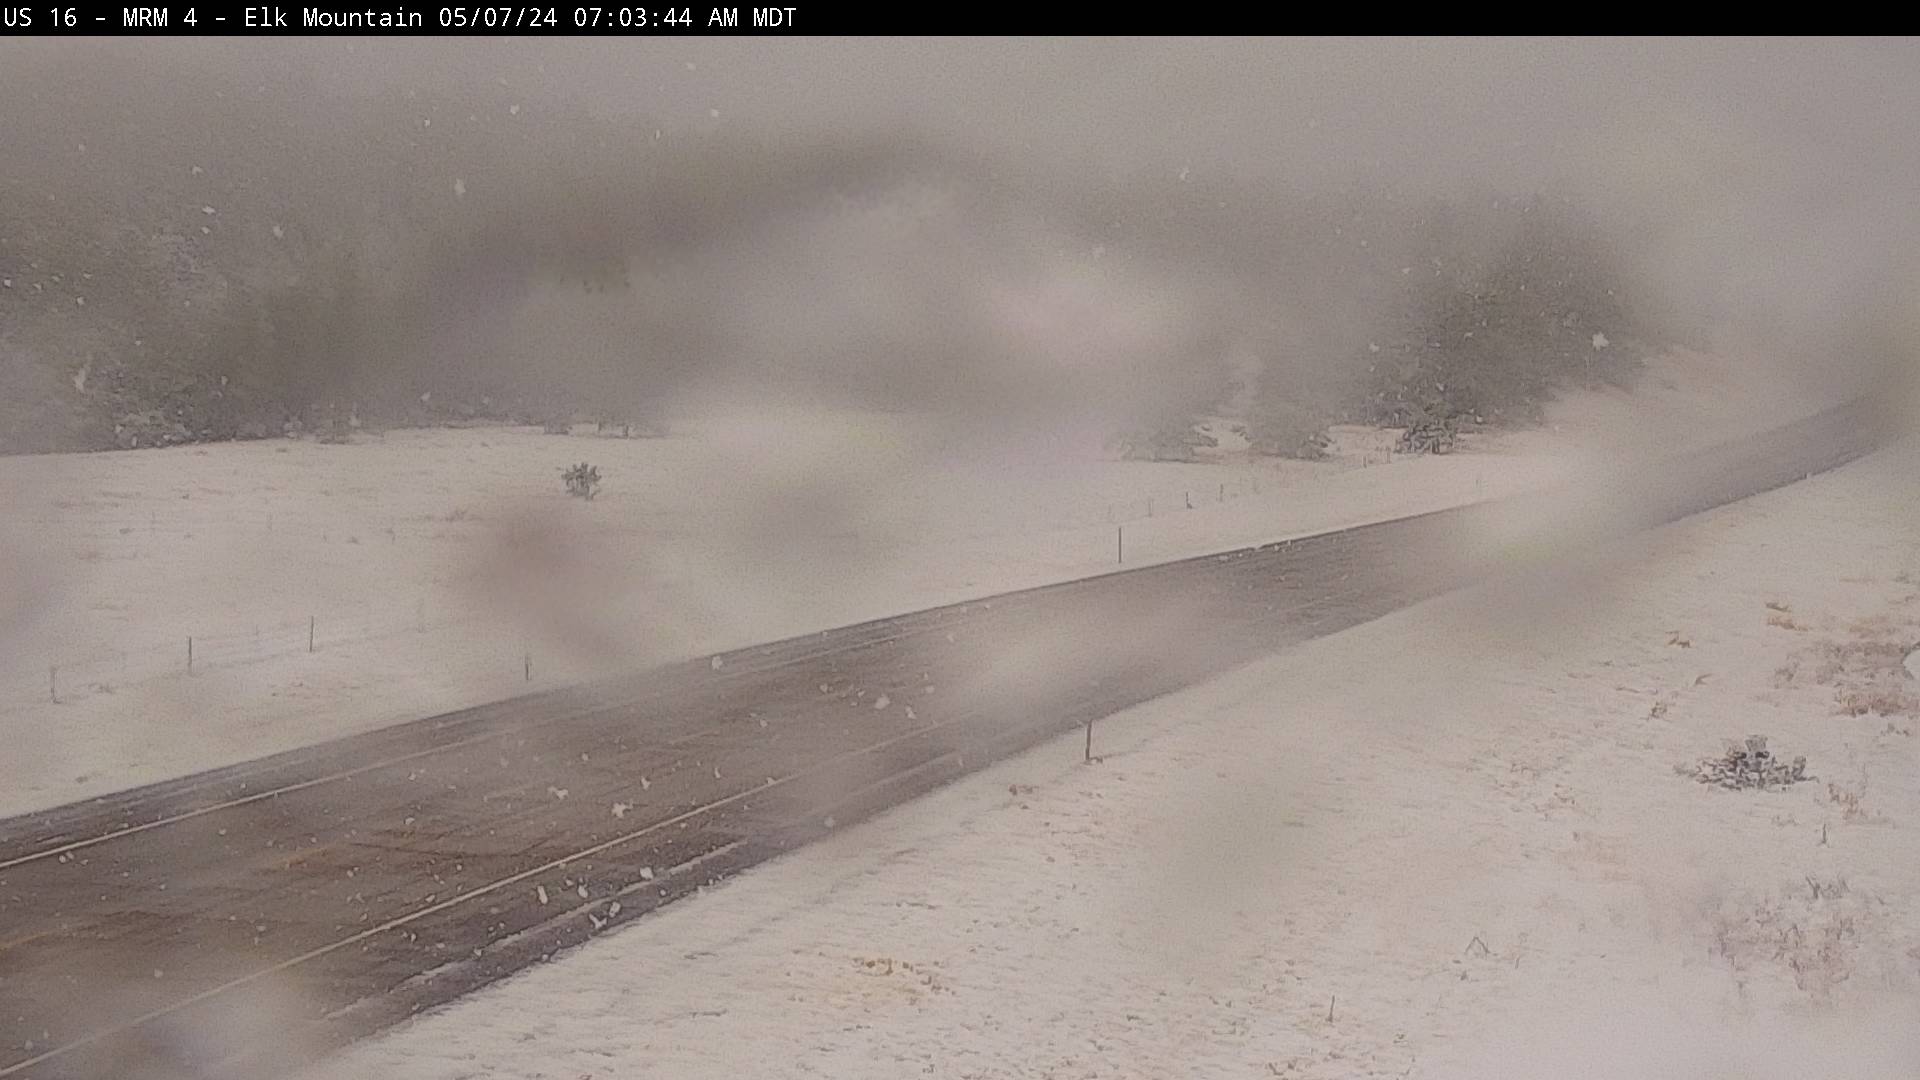 Traffic Cam 23 miles west of Custer along US-16 @ MM 4 - East Player